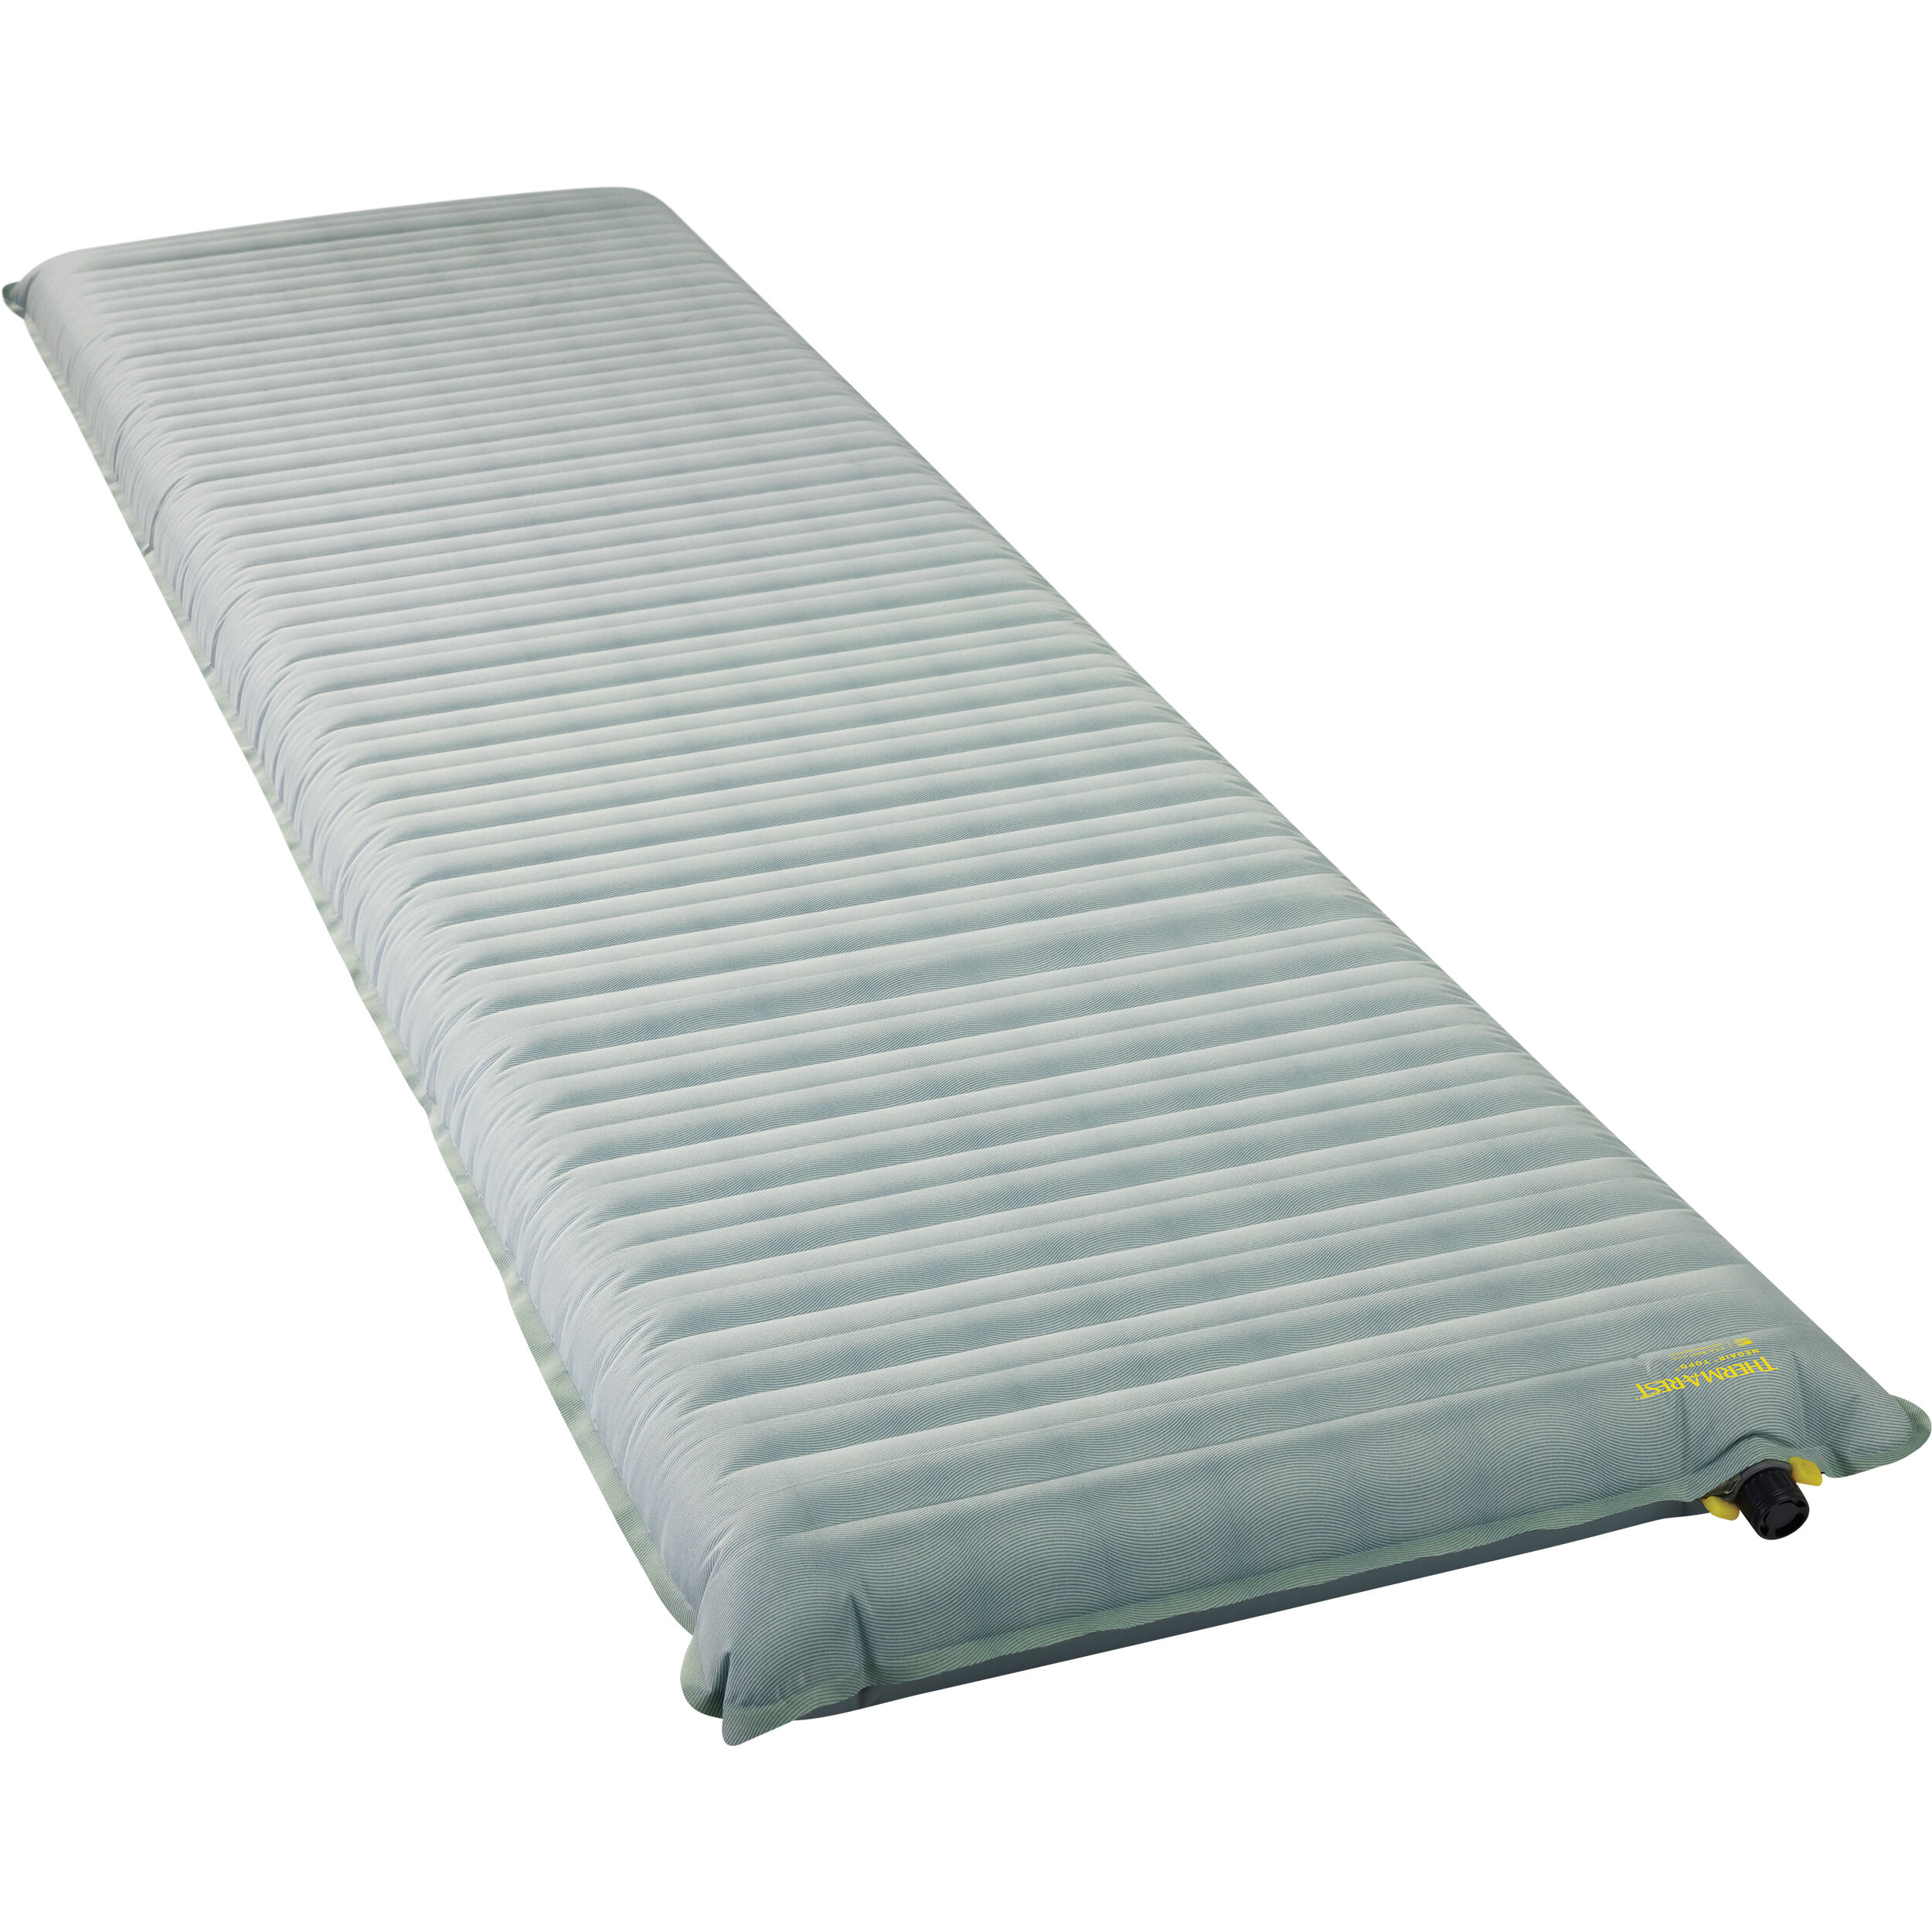 Thermarest THERM-A-REST PROLITE PLUS RED SELF INFLATING AIR MAT MATTRESS RRP £120 KL 